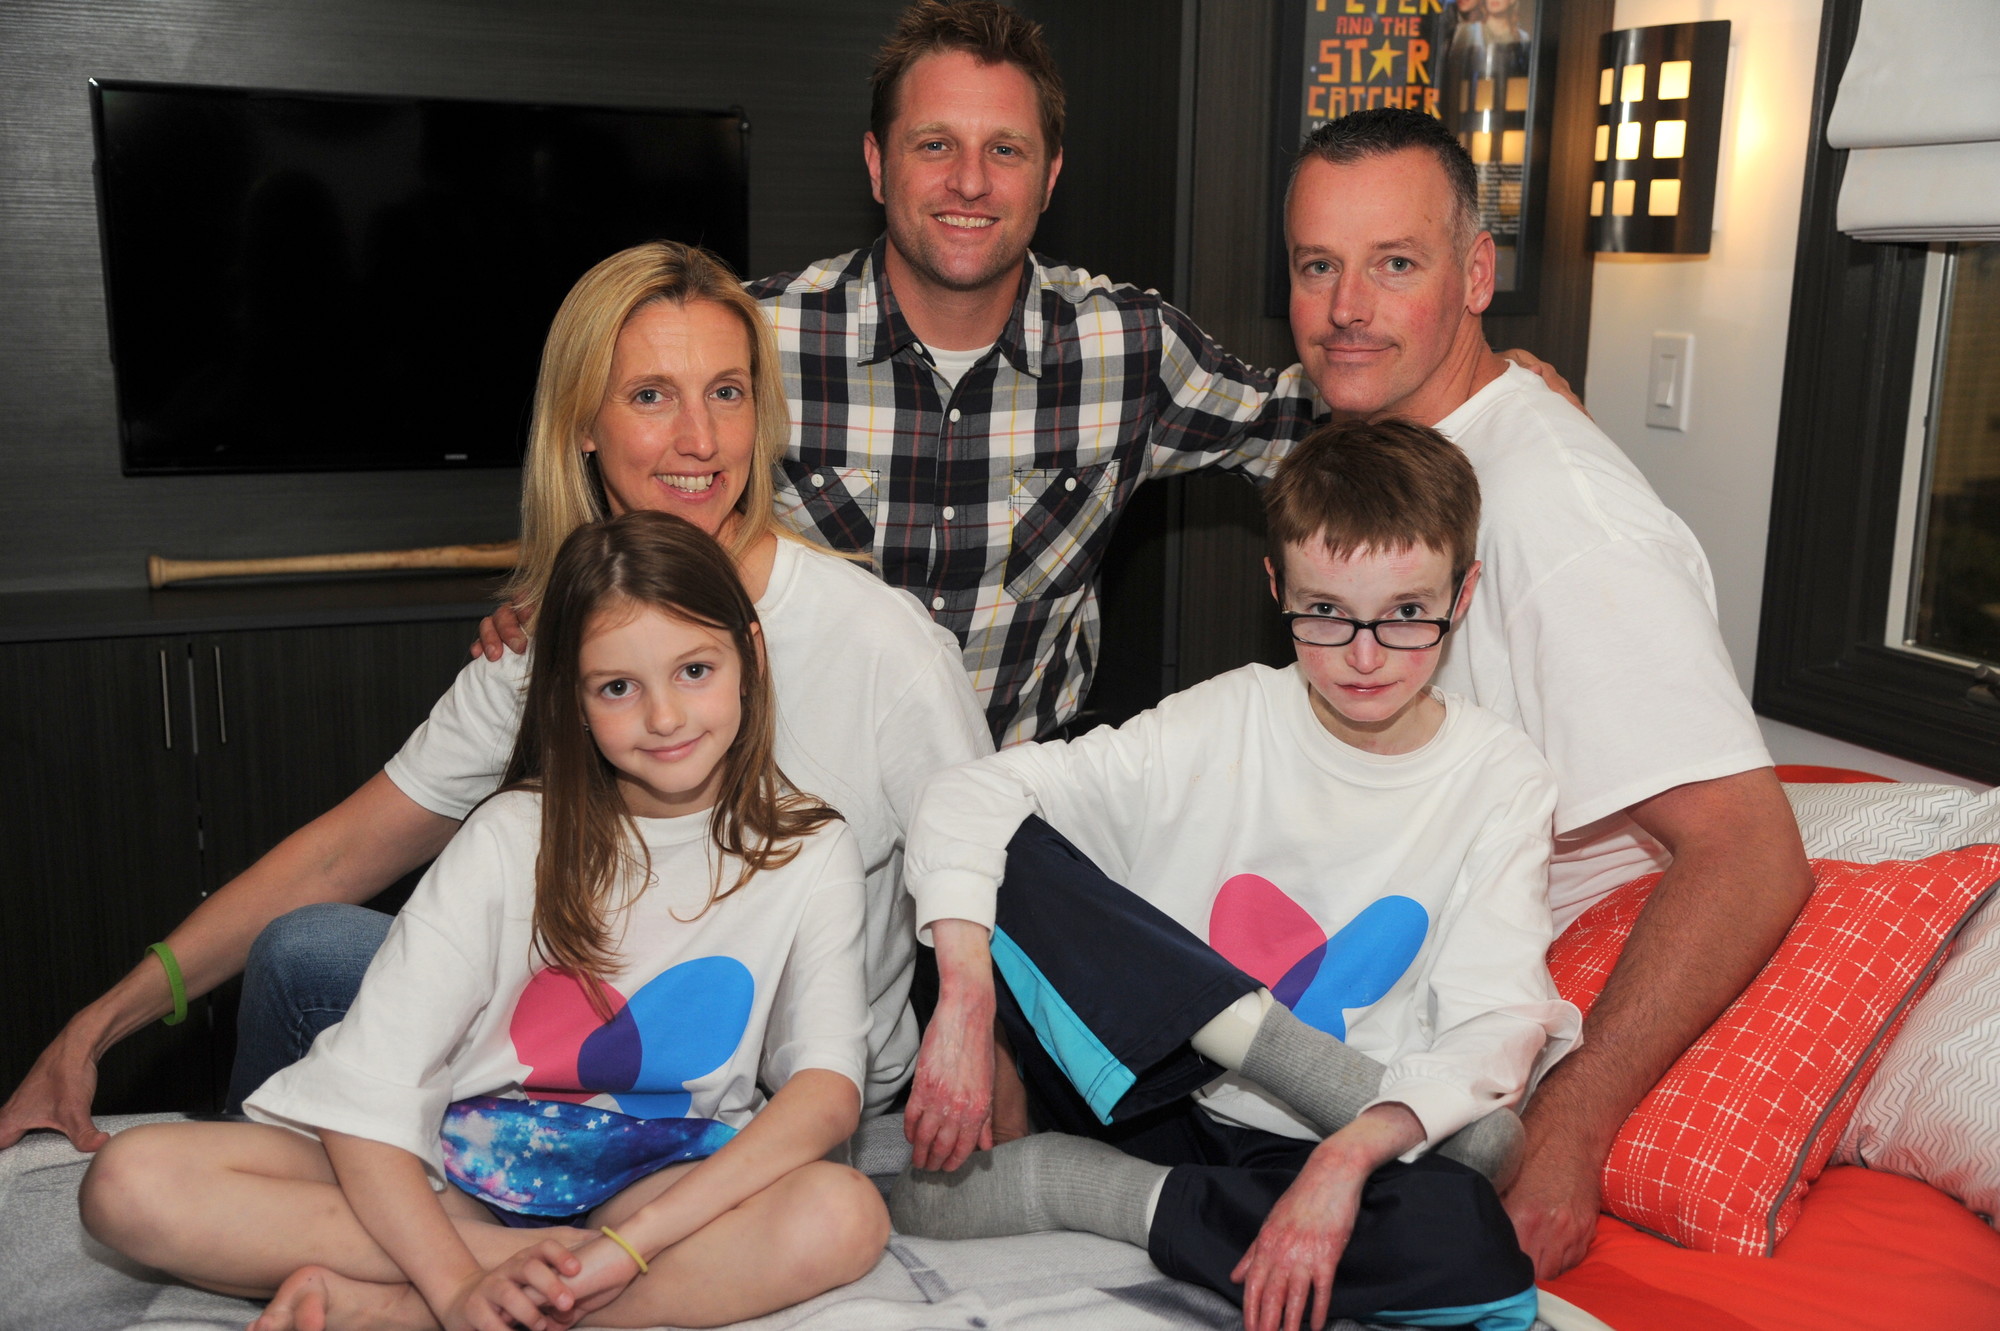 Seated on his new bed last June were Robbie; his sister, Allison; their parents, Kathy and Robert; and “George to the Rescue” host George Oliphant. An episode of “NBC’s George to the Rescue,” featuring the family, will air this weekend.